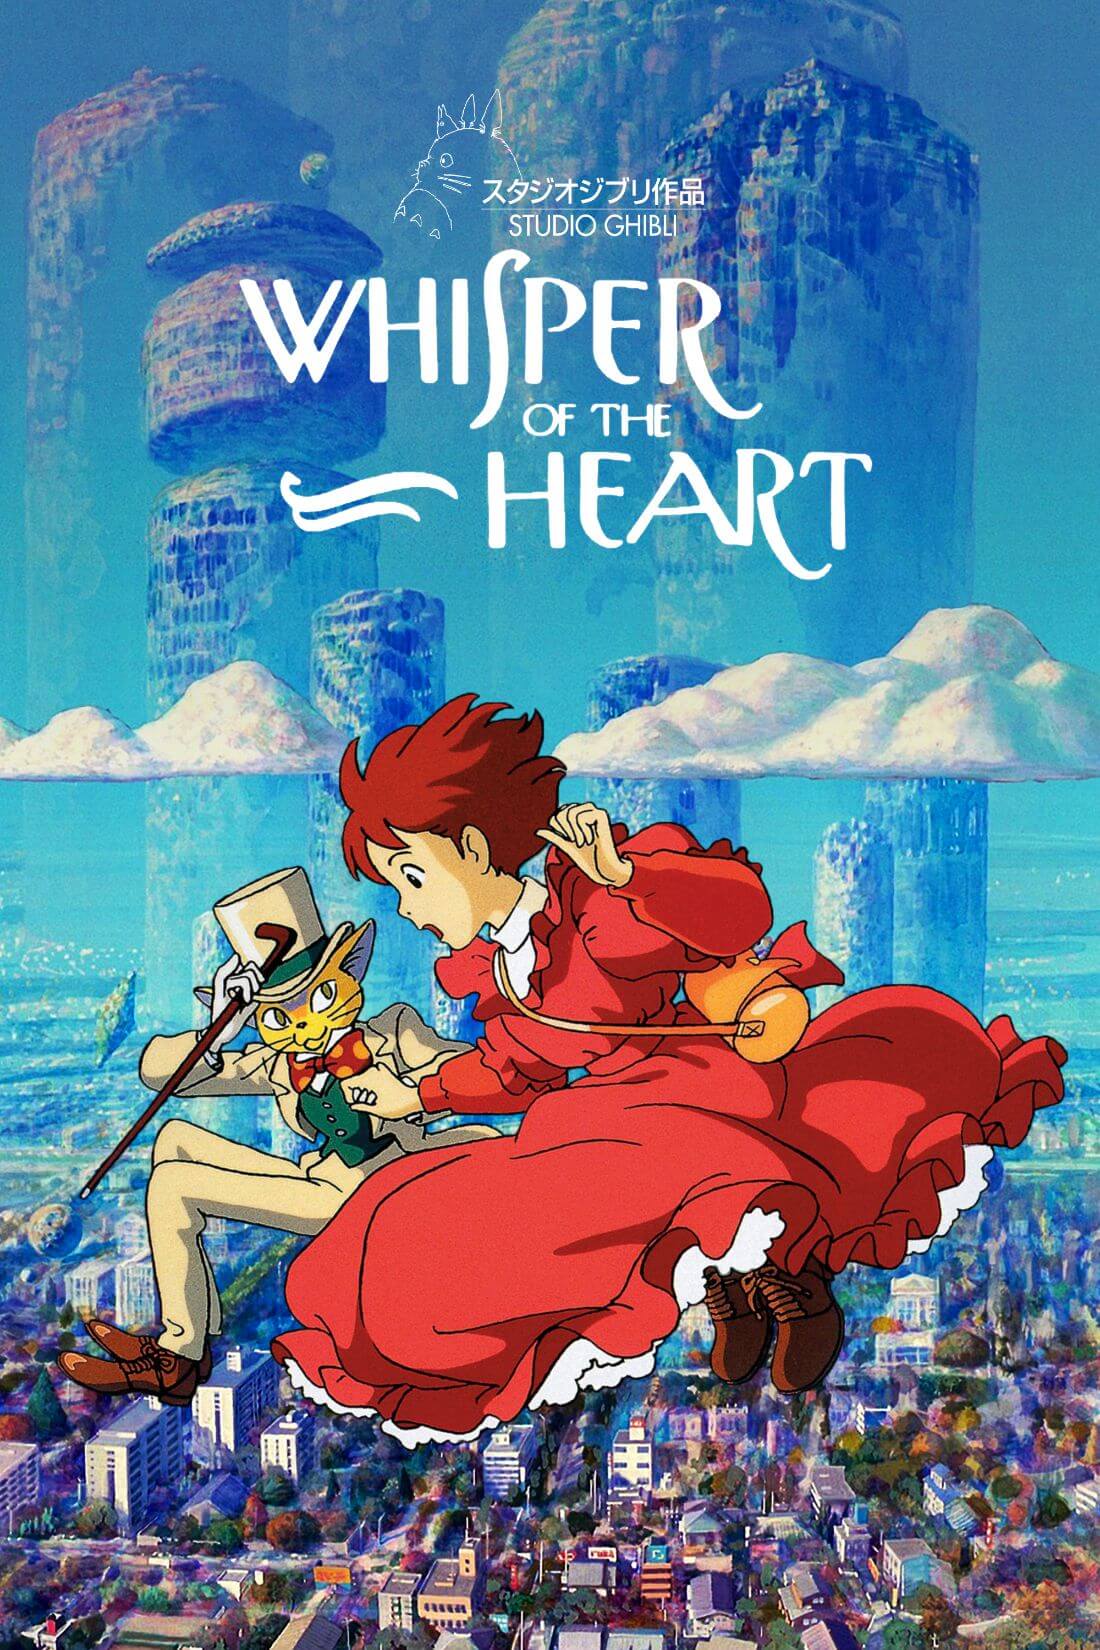 Whisper Of The Heart - Studio Ghibli Japanaese Animated Movie Poster -  Posters by Studio Ghibli | Buy Posters, Frames, Canvas & Digital Art Prints  | Small, Compact, Medium and Large Variants